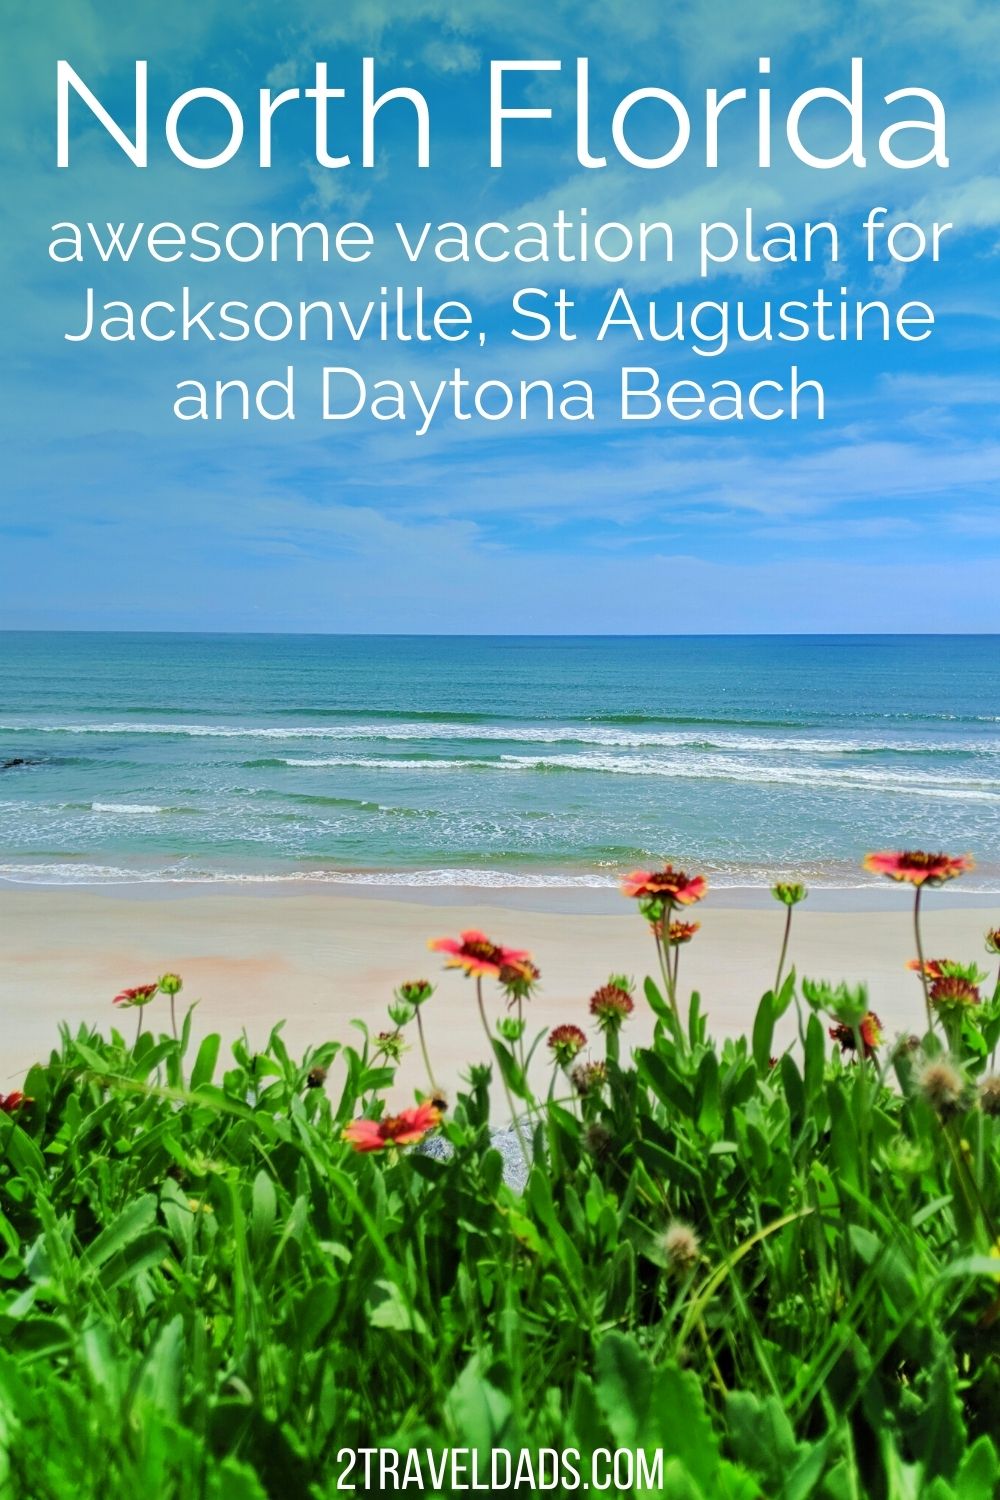 This North Florida vacation plan is ideal for enjoying the best of Daytona, Jacksonville and America's oldest city: St Augustine. Best beaches to visit, historic sites, and easy natural areas to enjoy on your Florida trip.